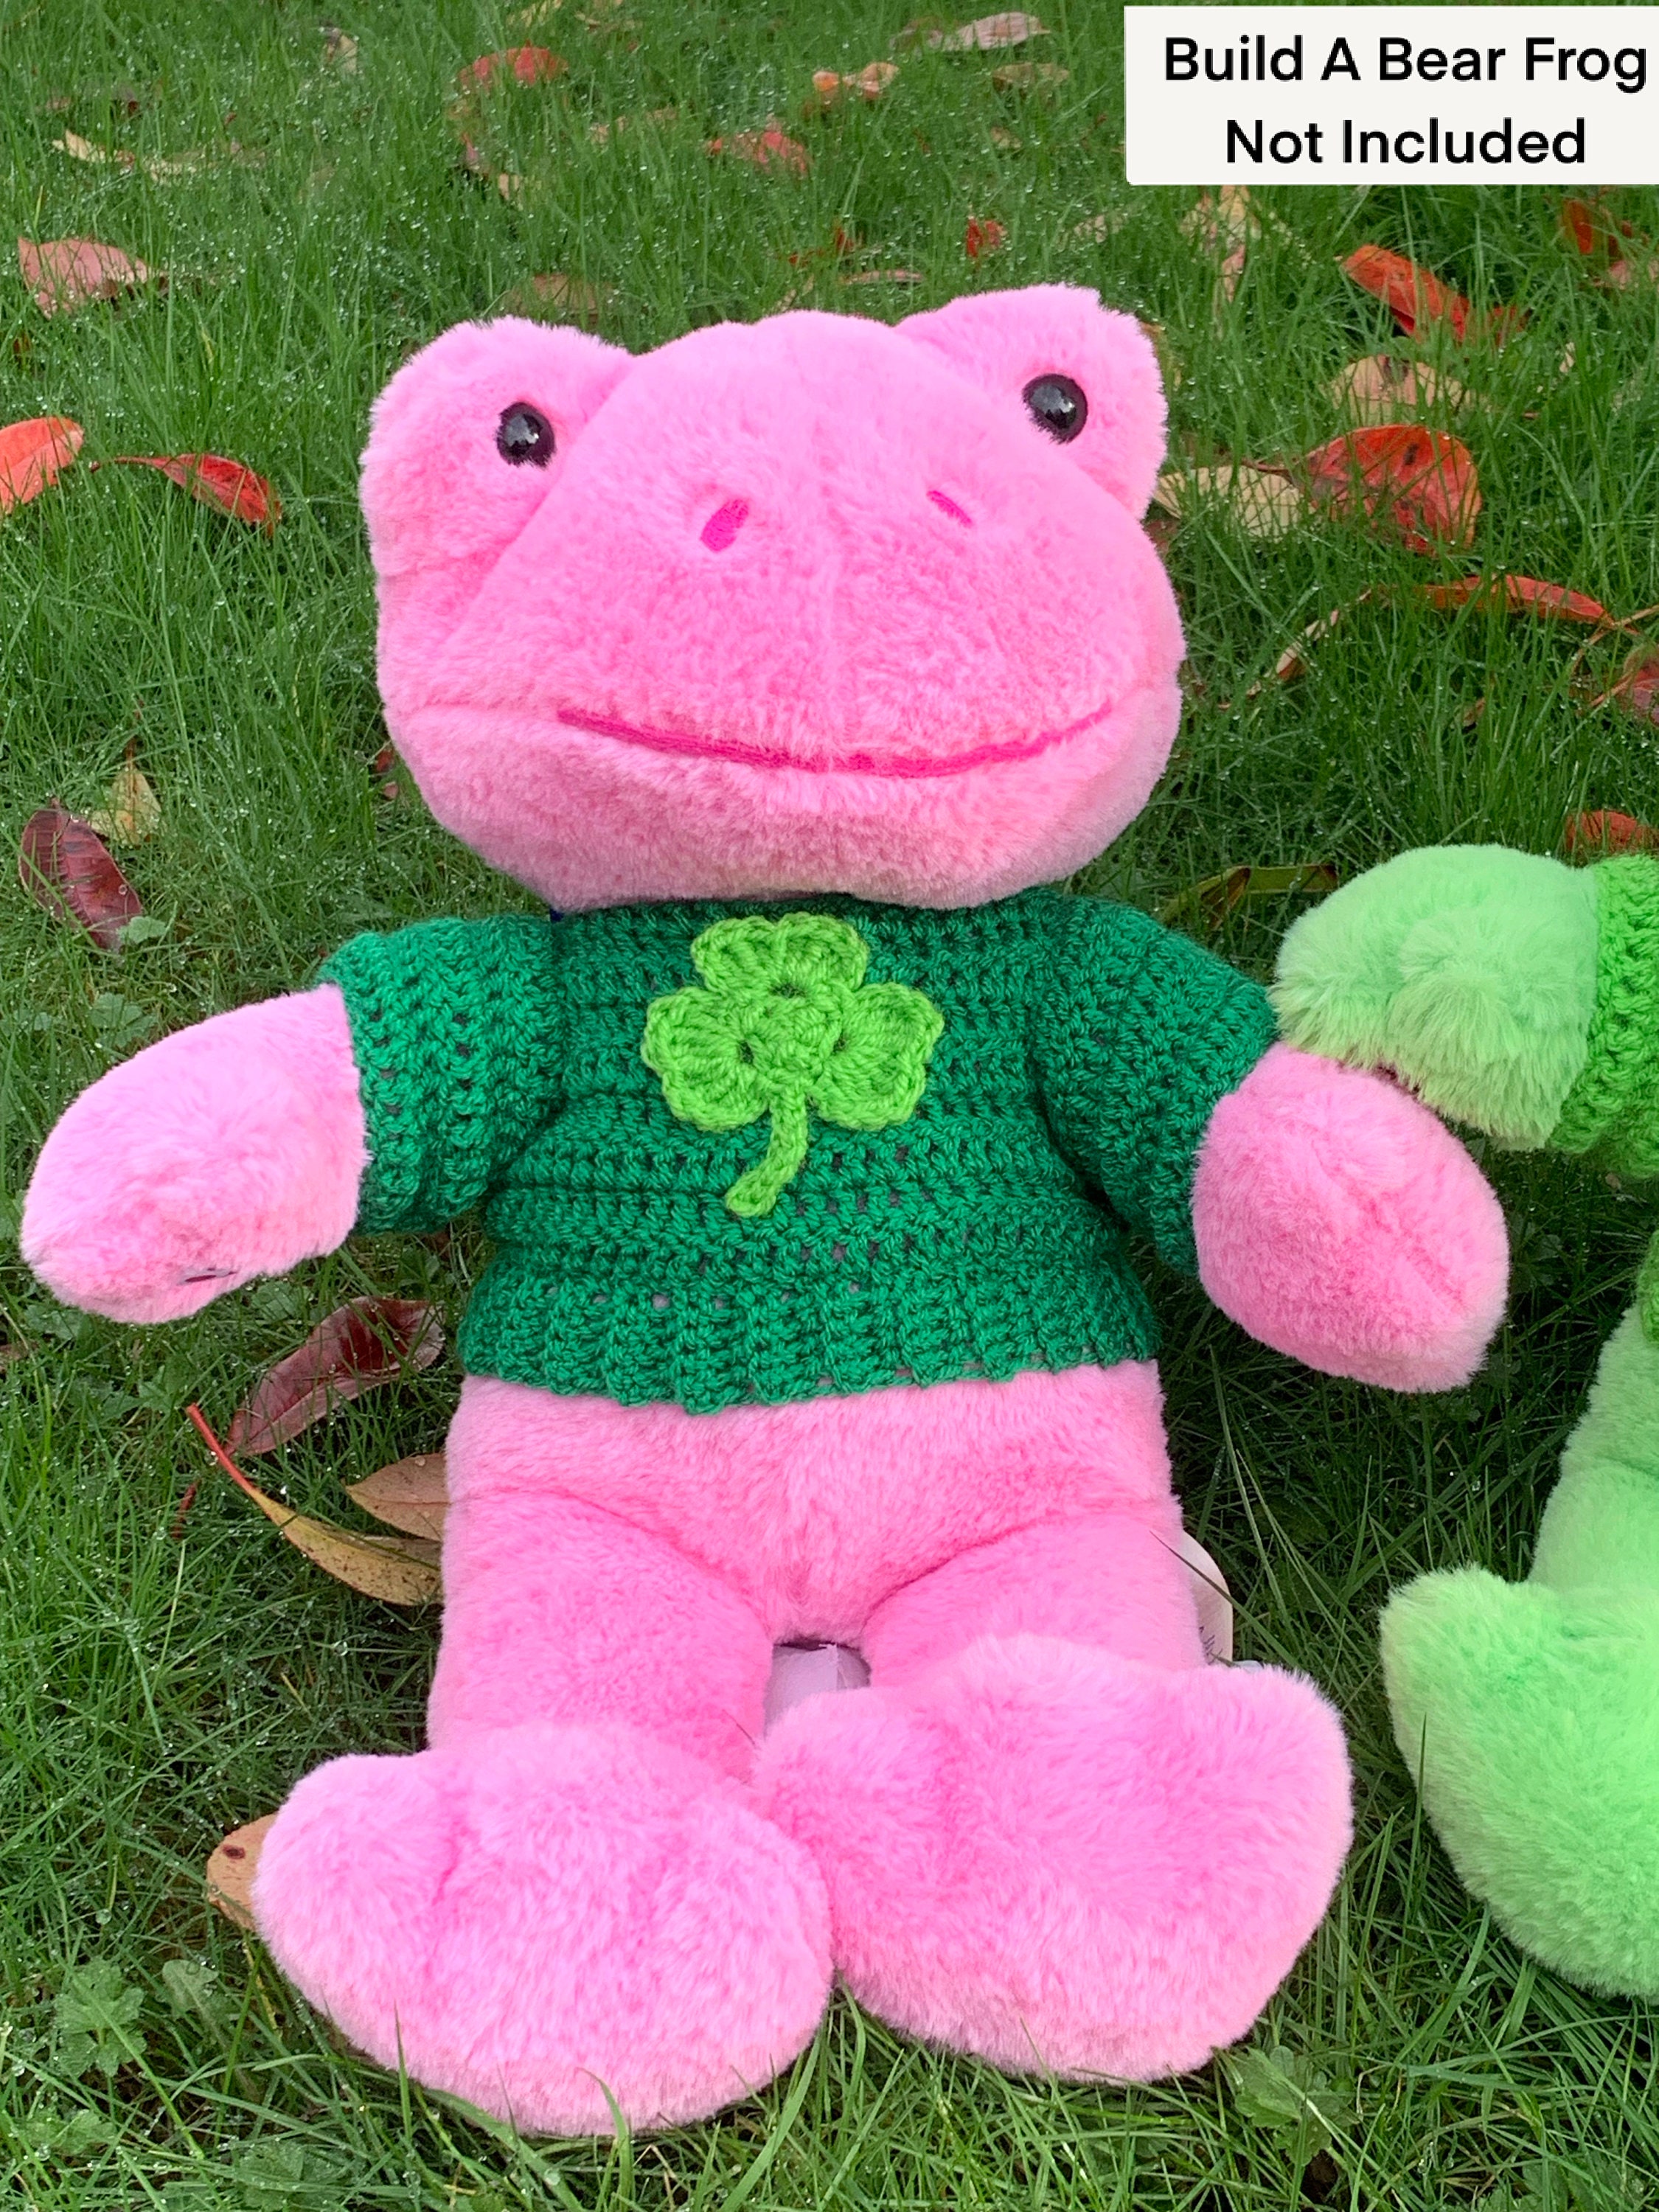 Crochet Build A Bear Spring Green Frog, Spring Pink Frog Jumper build A  Bear Frog Not Included Fits a 16 Inch/ 40-41cm Teddy. 